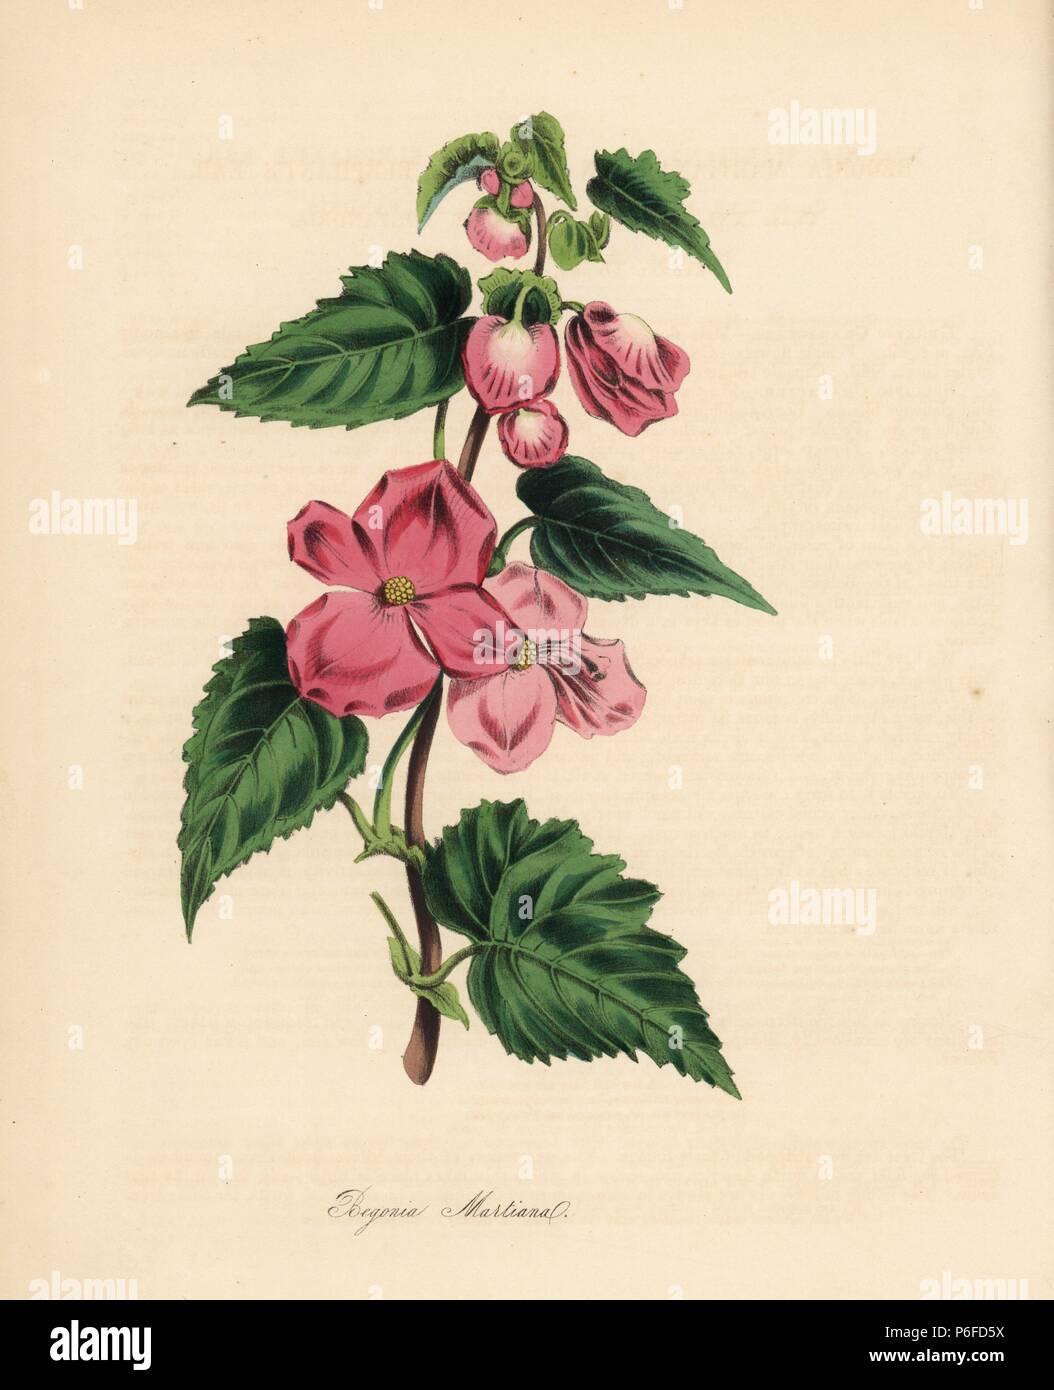 Begonia gracilis, native to Mexico (Von Martius' elephant's ear, Begonia martiana). Handcoloured zincograph by C. Chabot drawn by Miss M. A. Burnett from her 'Plantae Utiliores: or Illustrations of Useful Plants,' Whittaker, London, 1842. Miss Burnett drew the botanical illustrations, but the text was chiefly by her late brother, British botanist Gilbert Thomas Burnett (1800-1835). Stock Photo